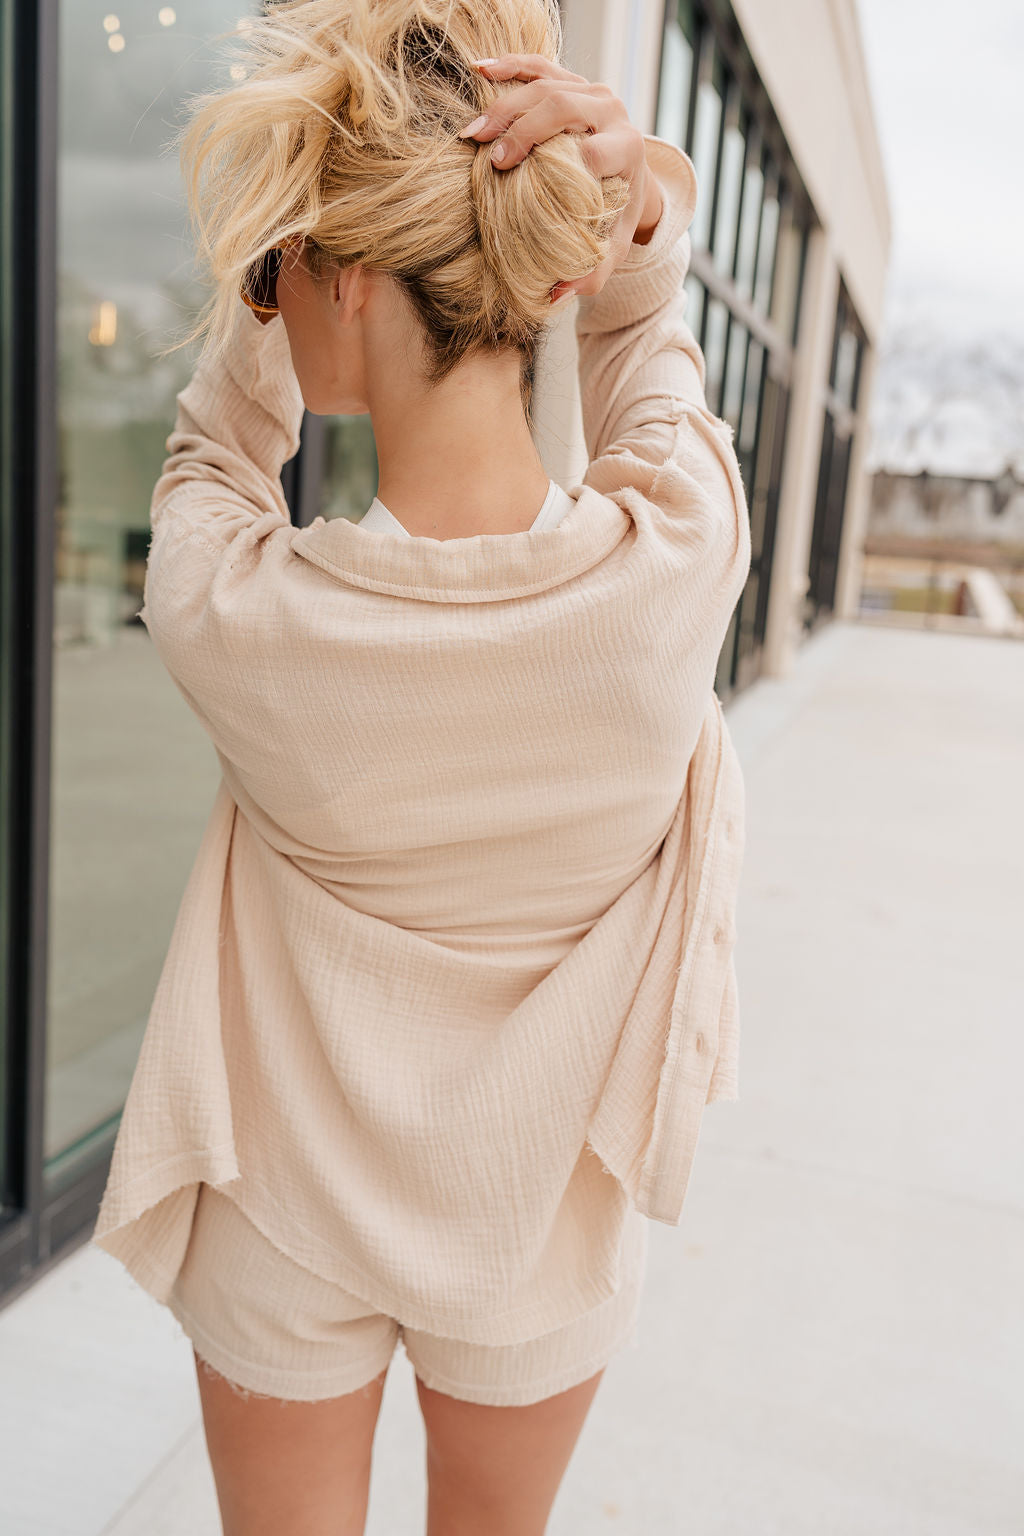 Back view of model wearing the Cassidy Beige Gauze Long Sleeve Top that features beige gauze fabric, a button-up front with beige button closures, a collared neckline, a left front chest pocket, drop shoulder long sleeves, and frayed hem details. Top is worn over white tank.